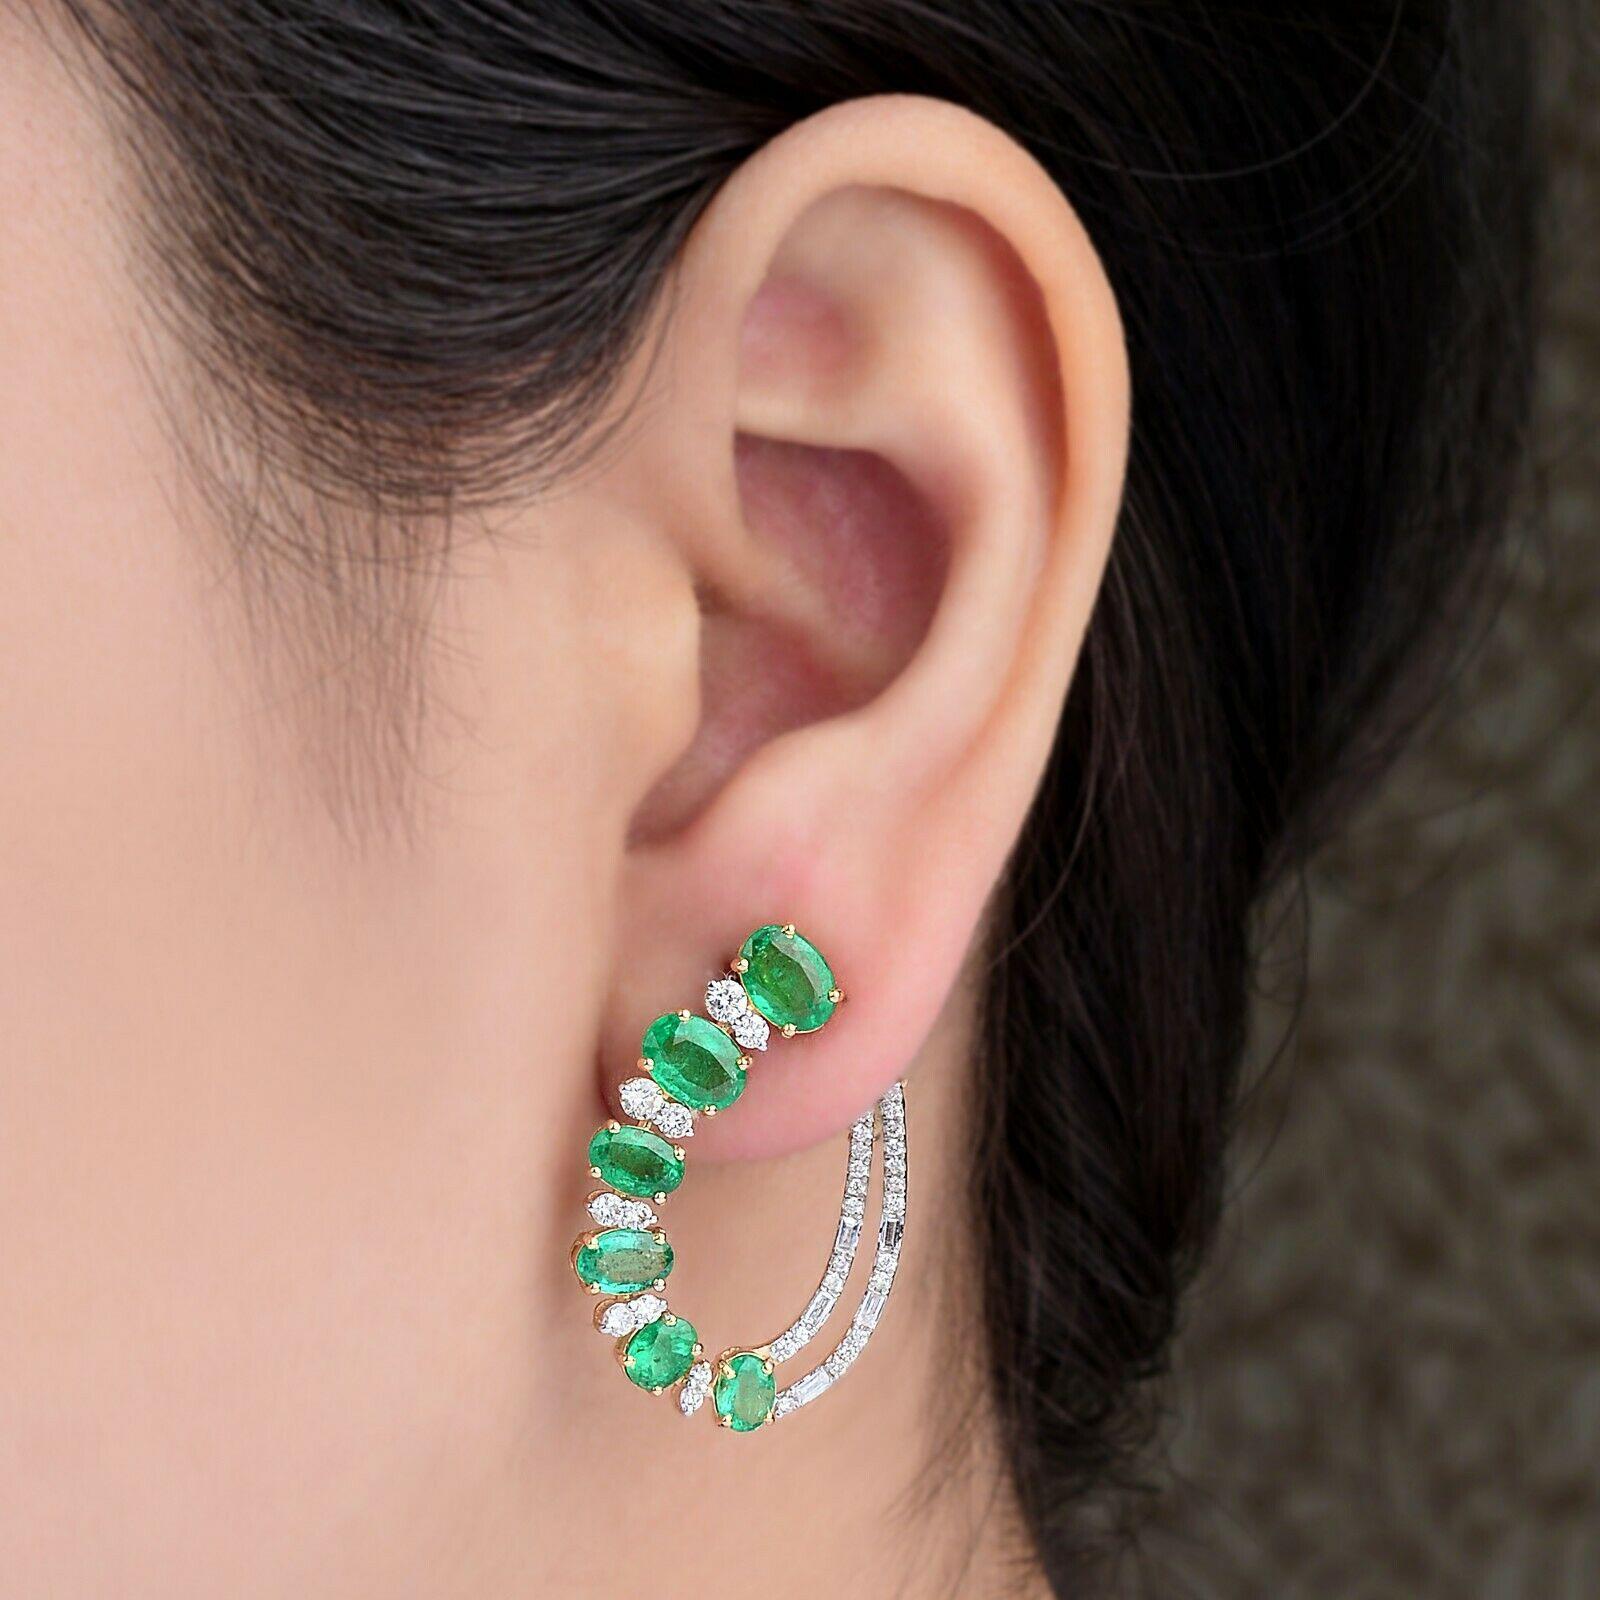 Cast in 14-karat gold, these beautiful double hoop earrings are hand set with 5.53 carats of emerald and 1.20 carats of sparkling diamonds. 

FOLLOW  MEGHNA JEWELS storefront to view the latest collection & exclusive pieces.  Meghna Jewels is